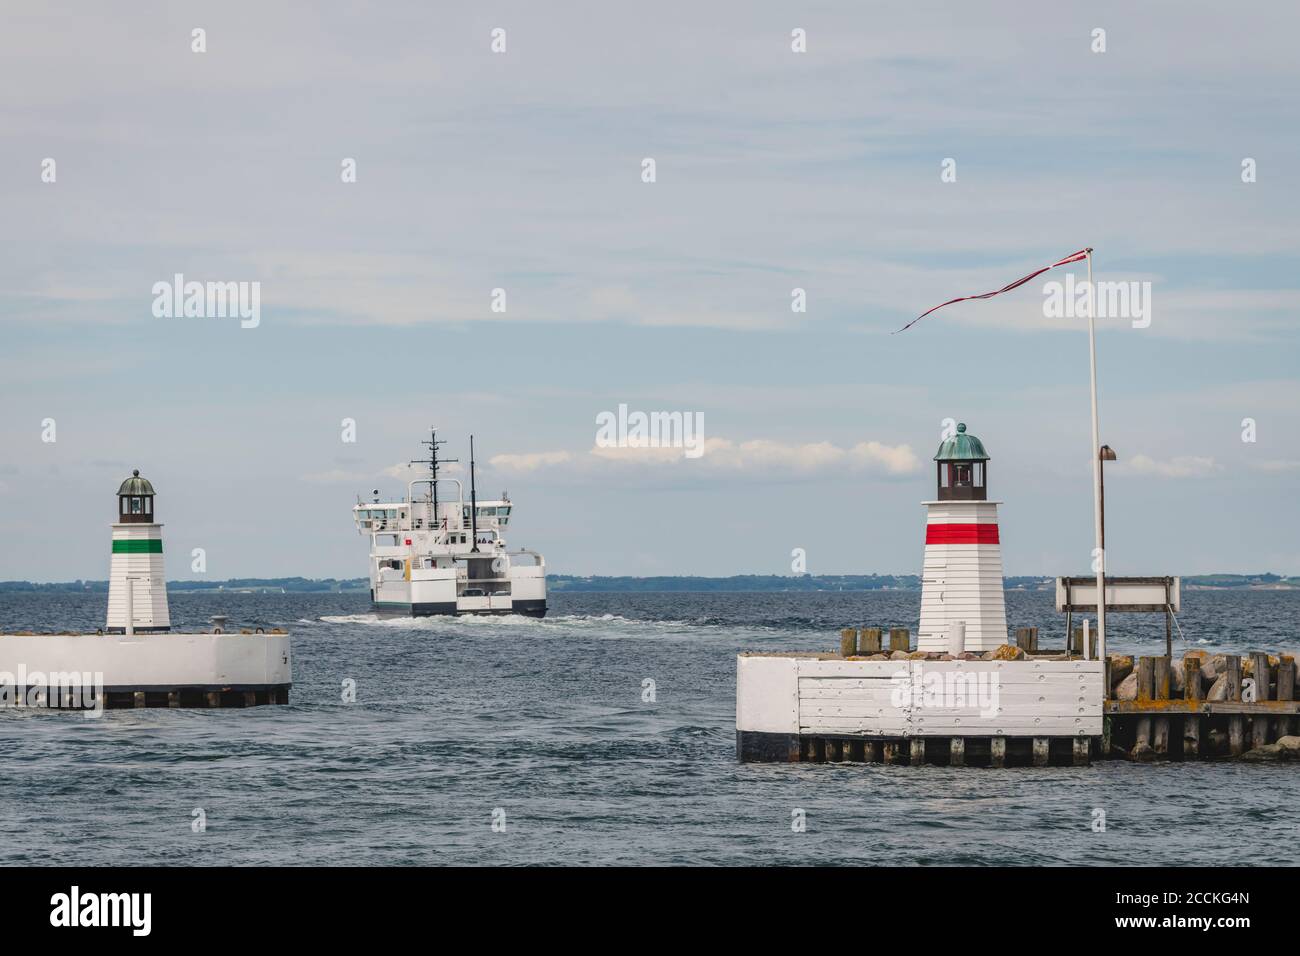 Denmark, Region of Southern Denmark, Soby, Two coastal lighthouses with ship sailing away in background Stock Photo